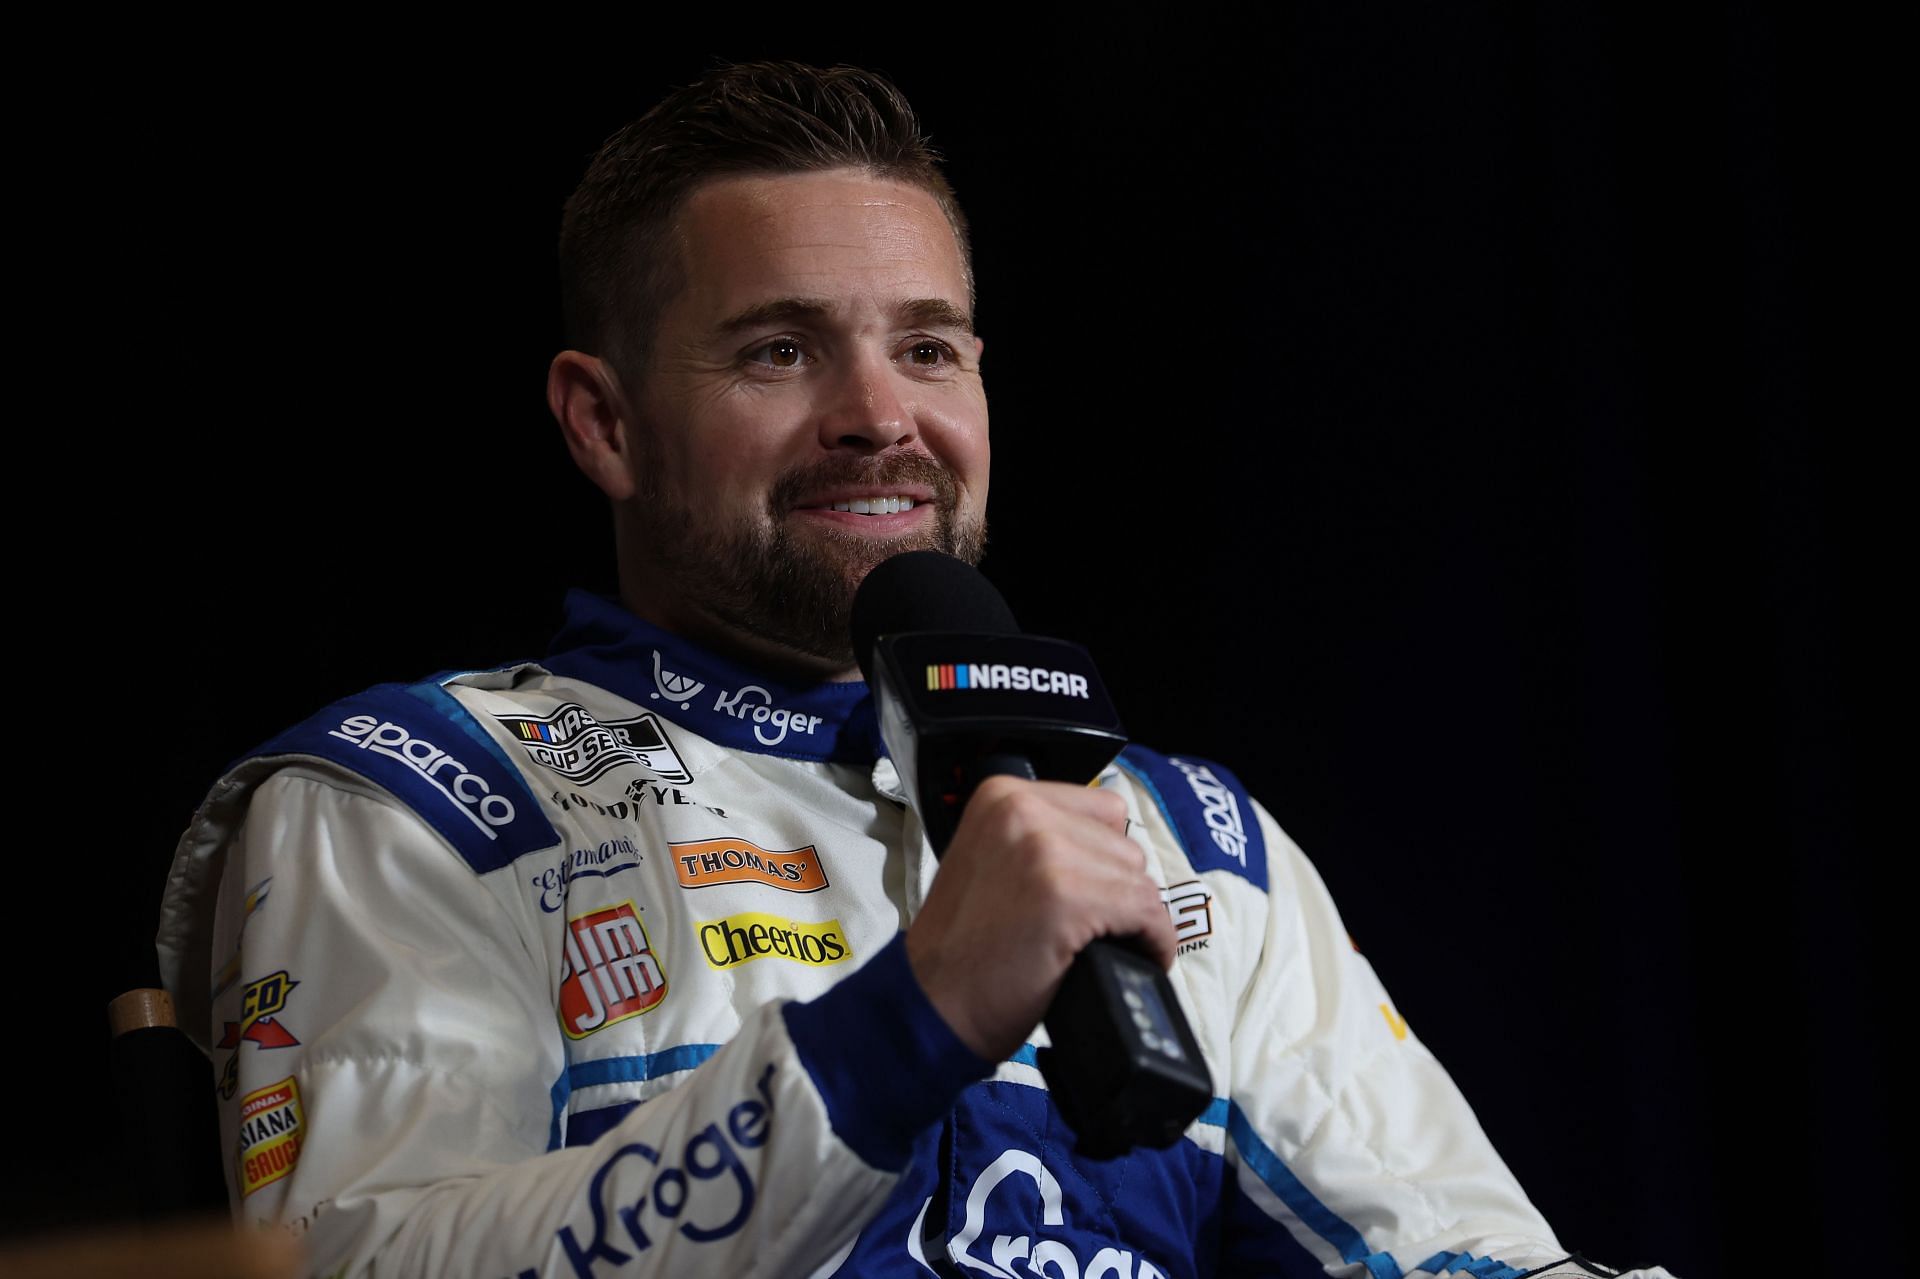 Ricky Stenhouse Jr. speaks during the Media Day for the NASCAR Cup Series 64th Annual Daytona 500 (Photo by James Gilbert/Getty Images)